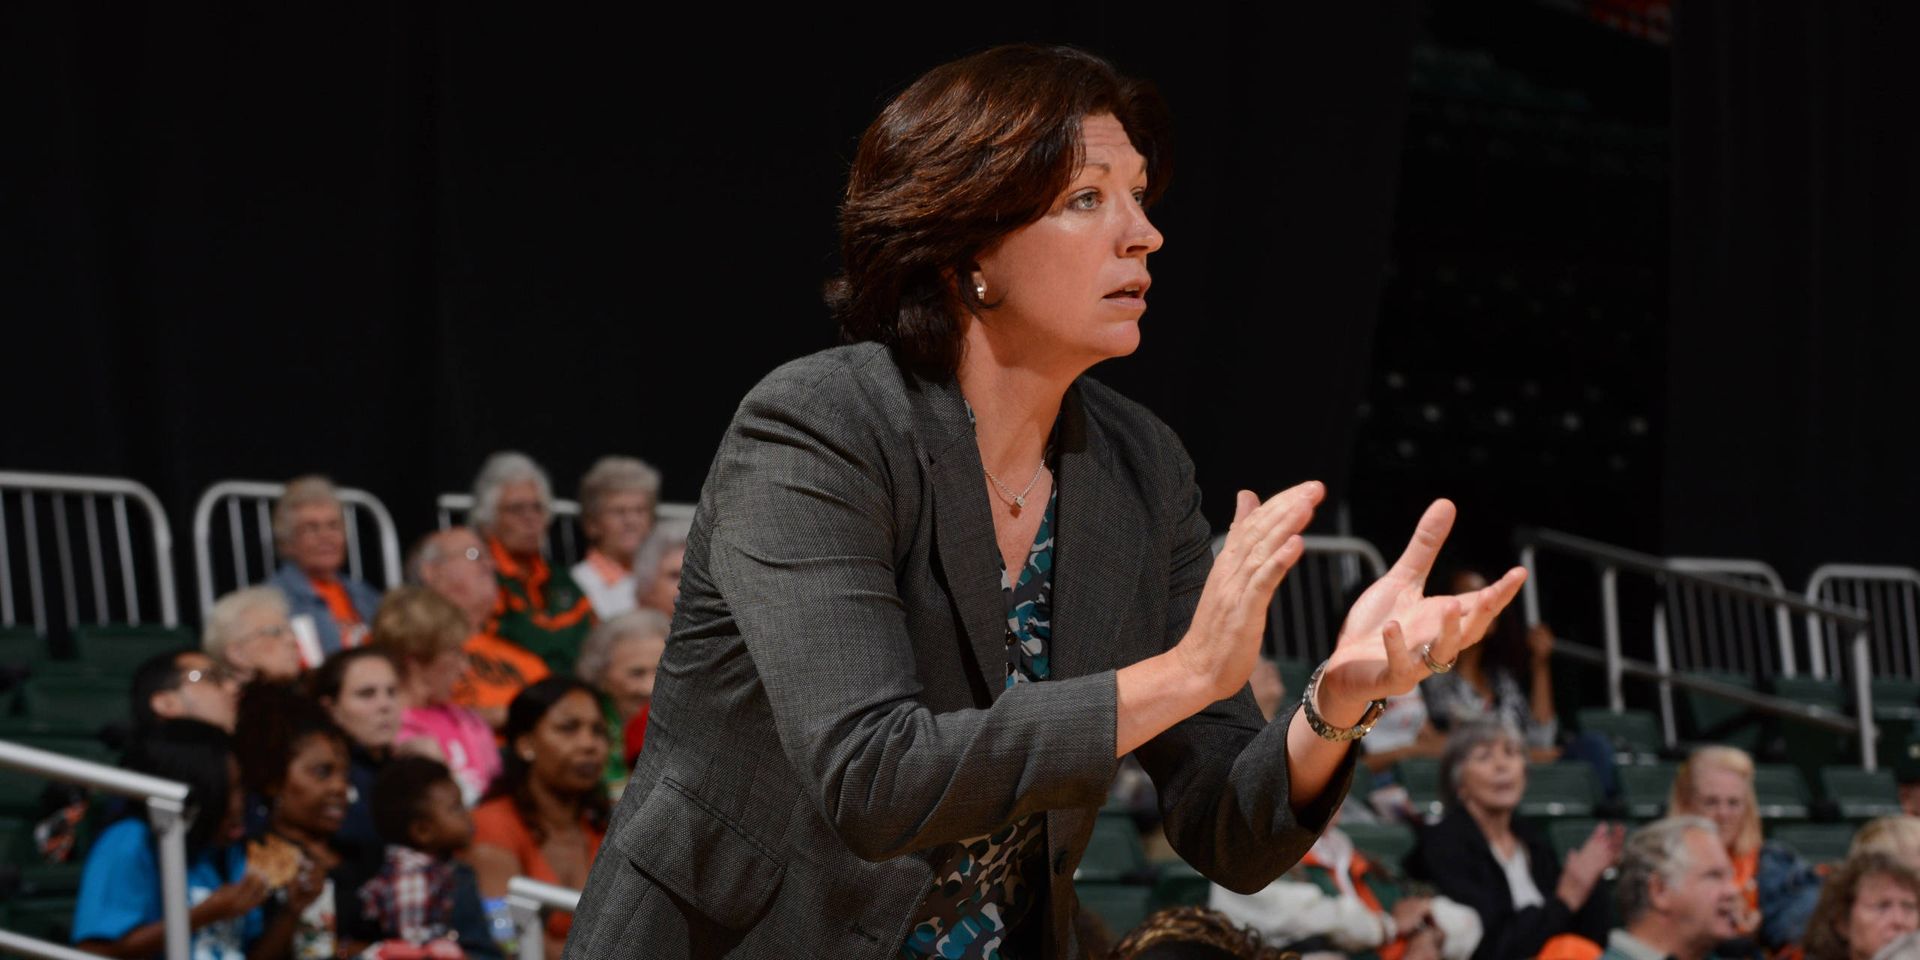 Canes Hoops to Storm the Dorms Monday